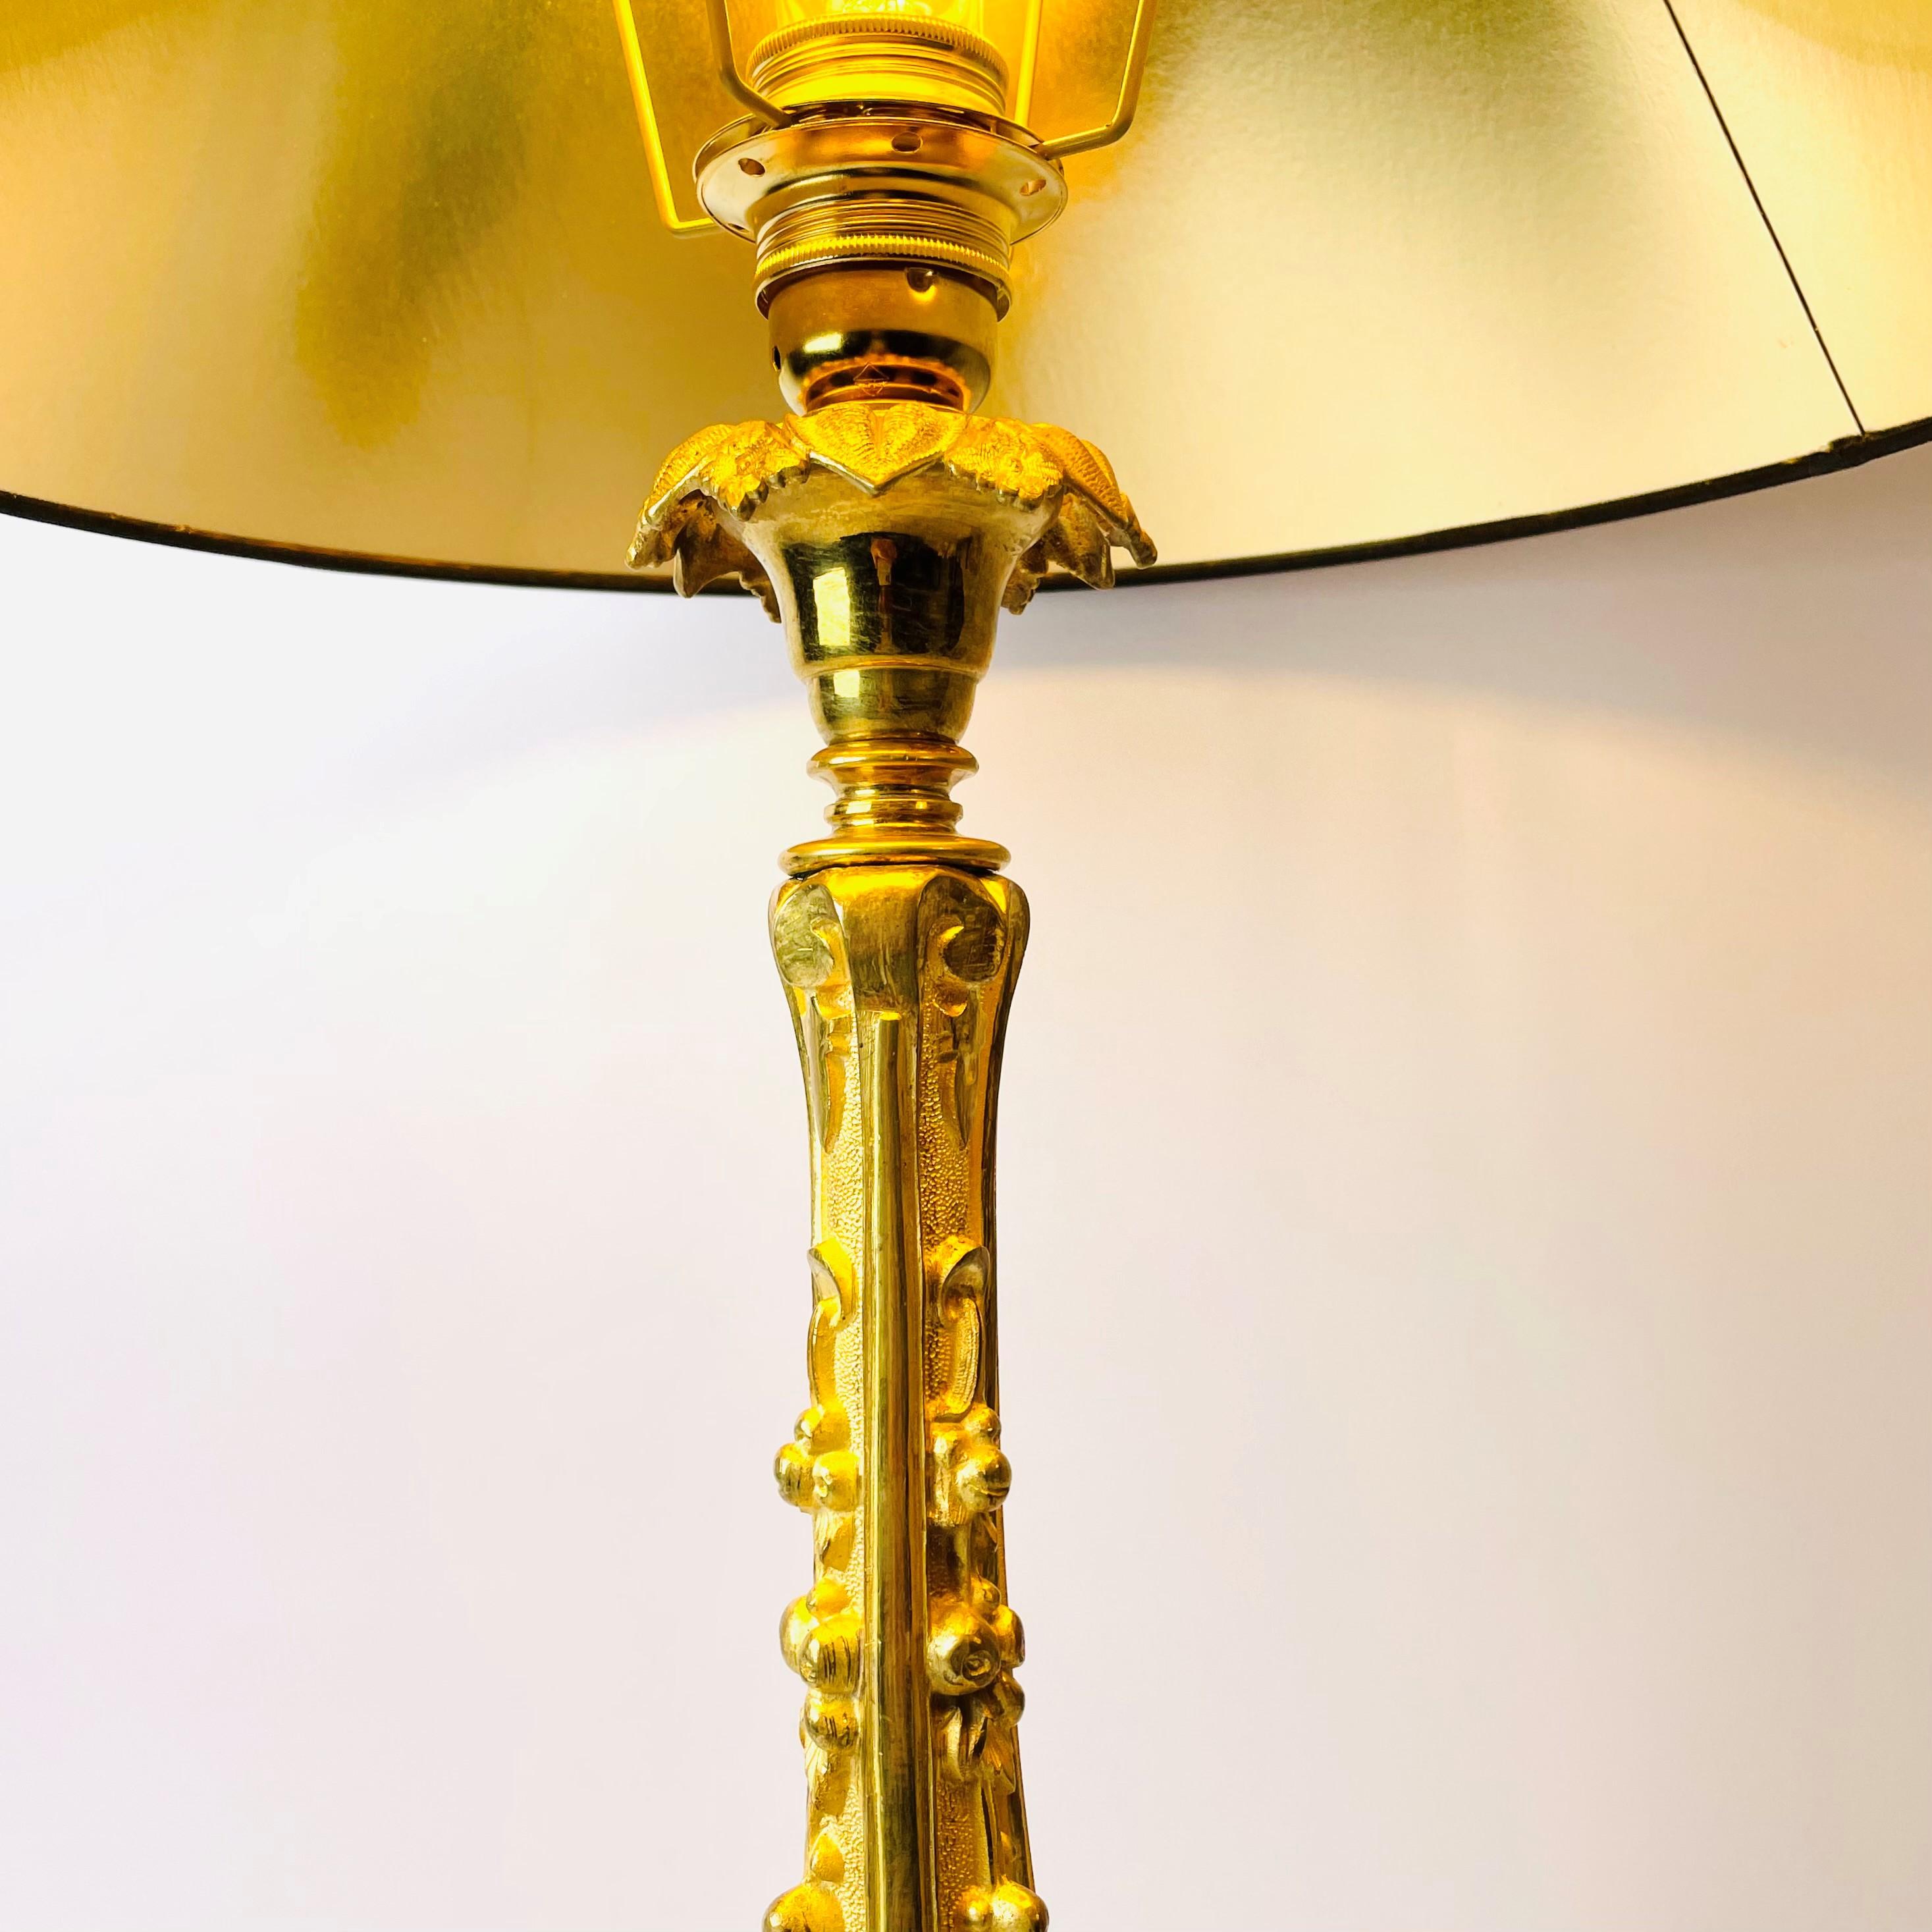 Large Rococo Revival Table Lamp in Gilded Bronze, Mid-19th Century In Good Condition For Sale In Knivsta, SE